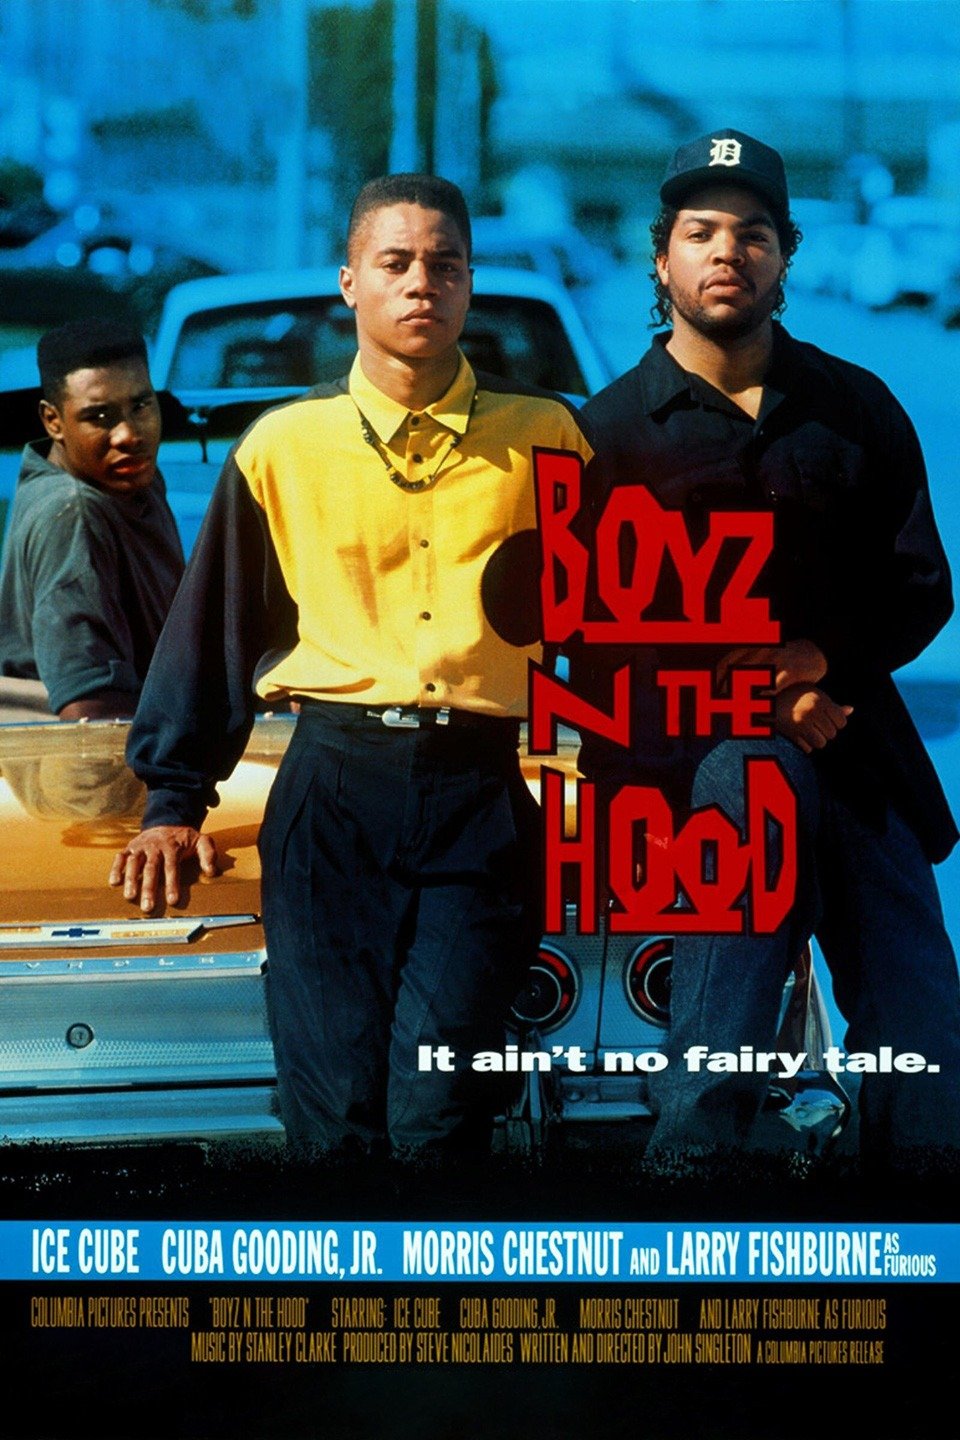 Boyz N The Hood Trailer 1 Trailers And Videos Rotten Tomatoes 3248